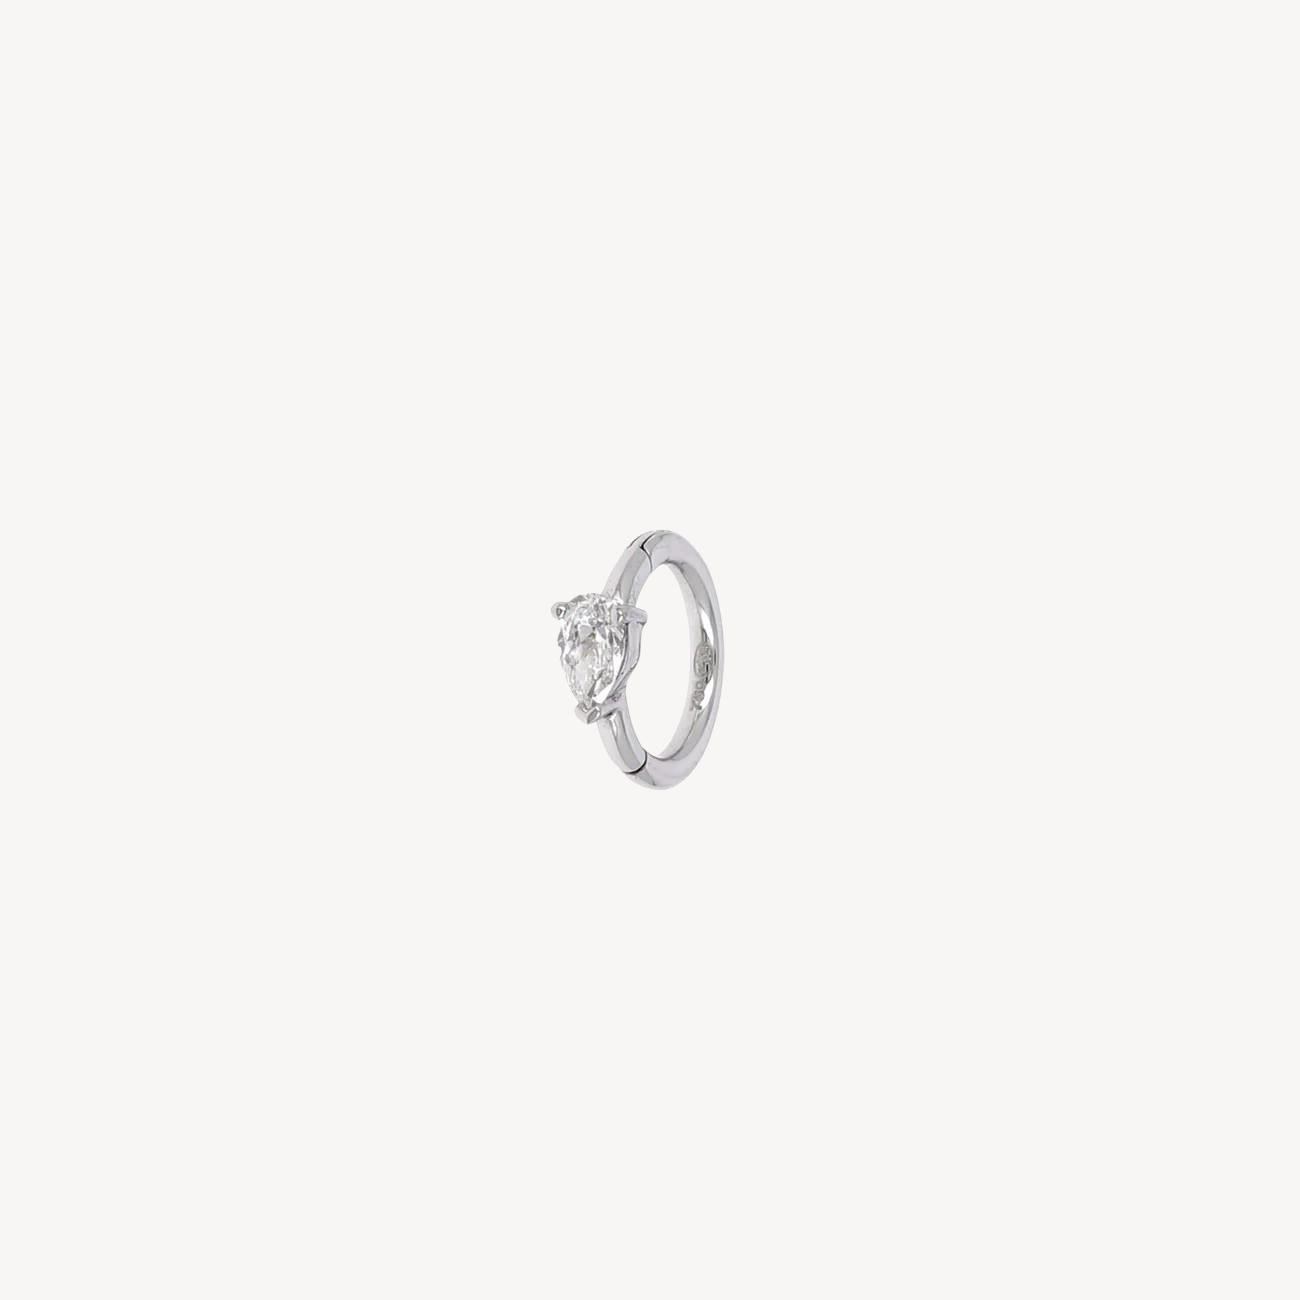 6.5mm 3.5x2.5mm pear white gold hoop